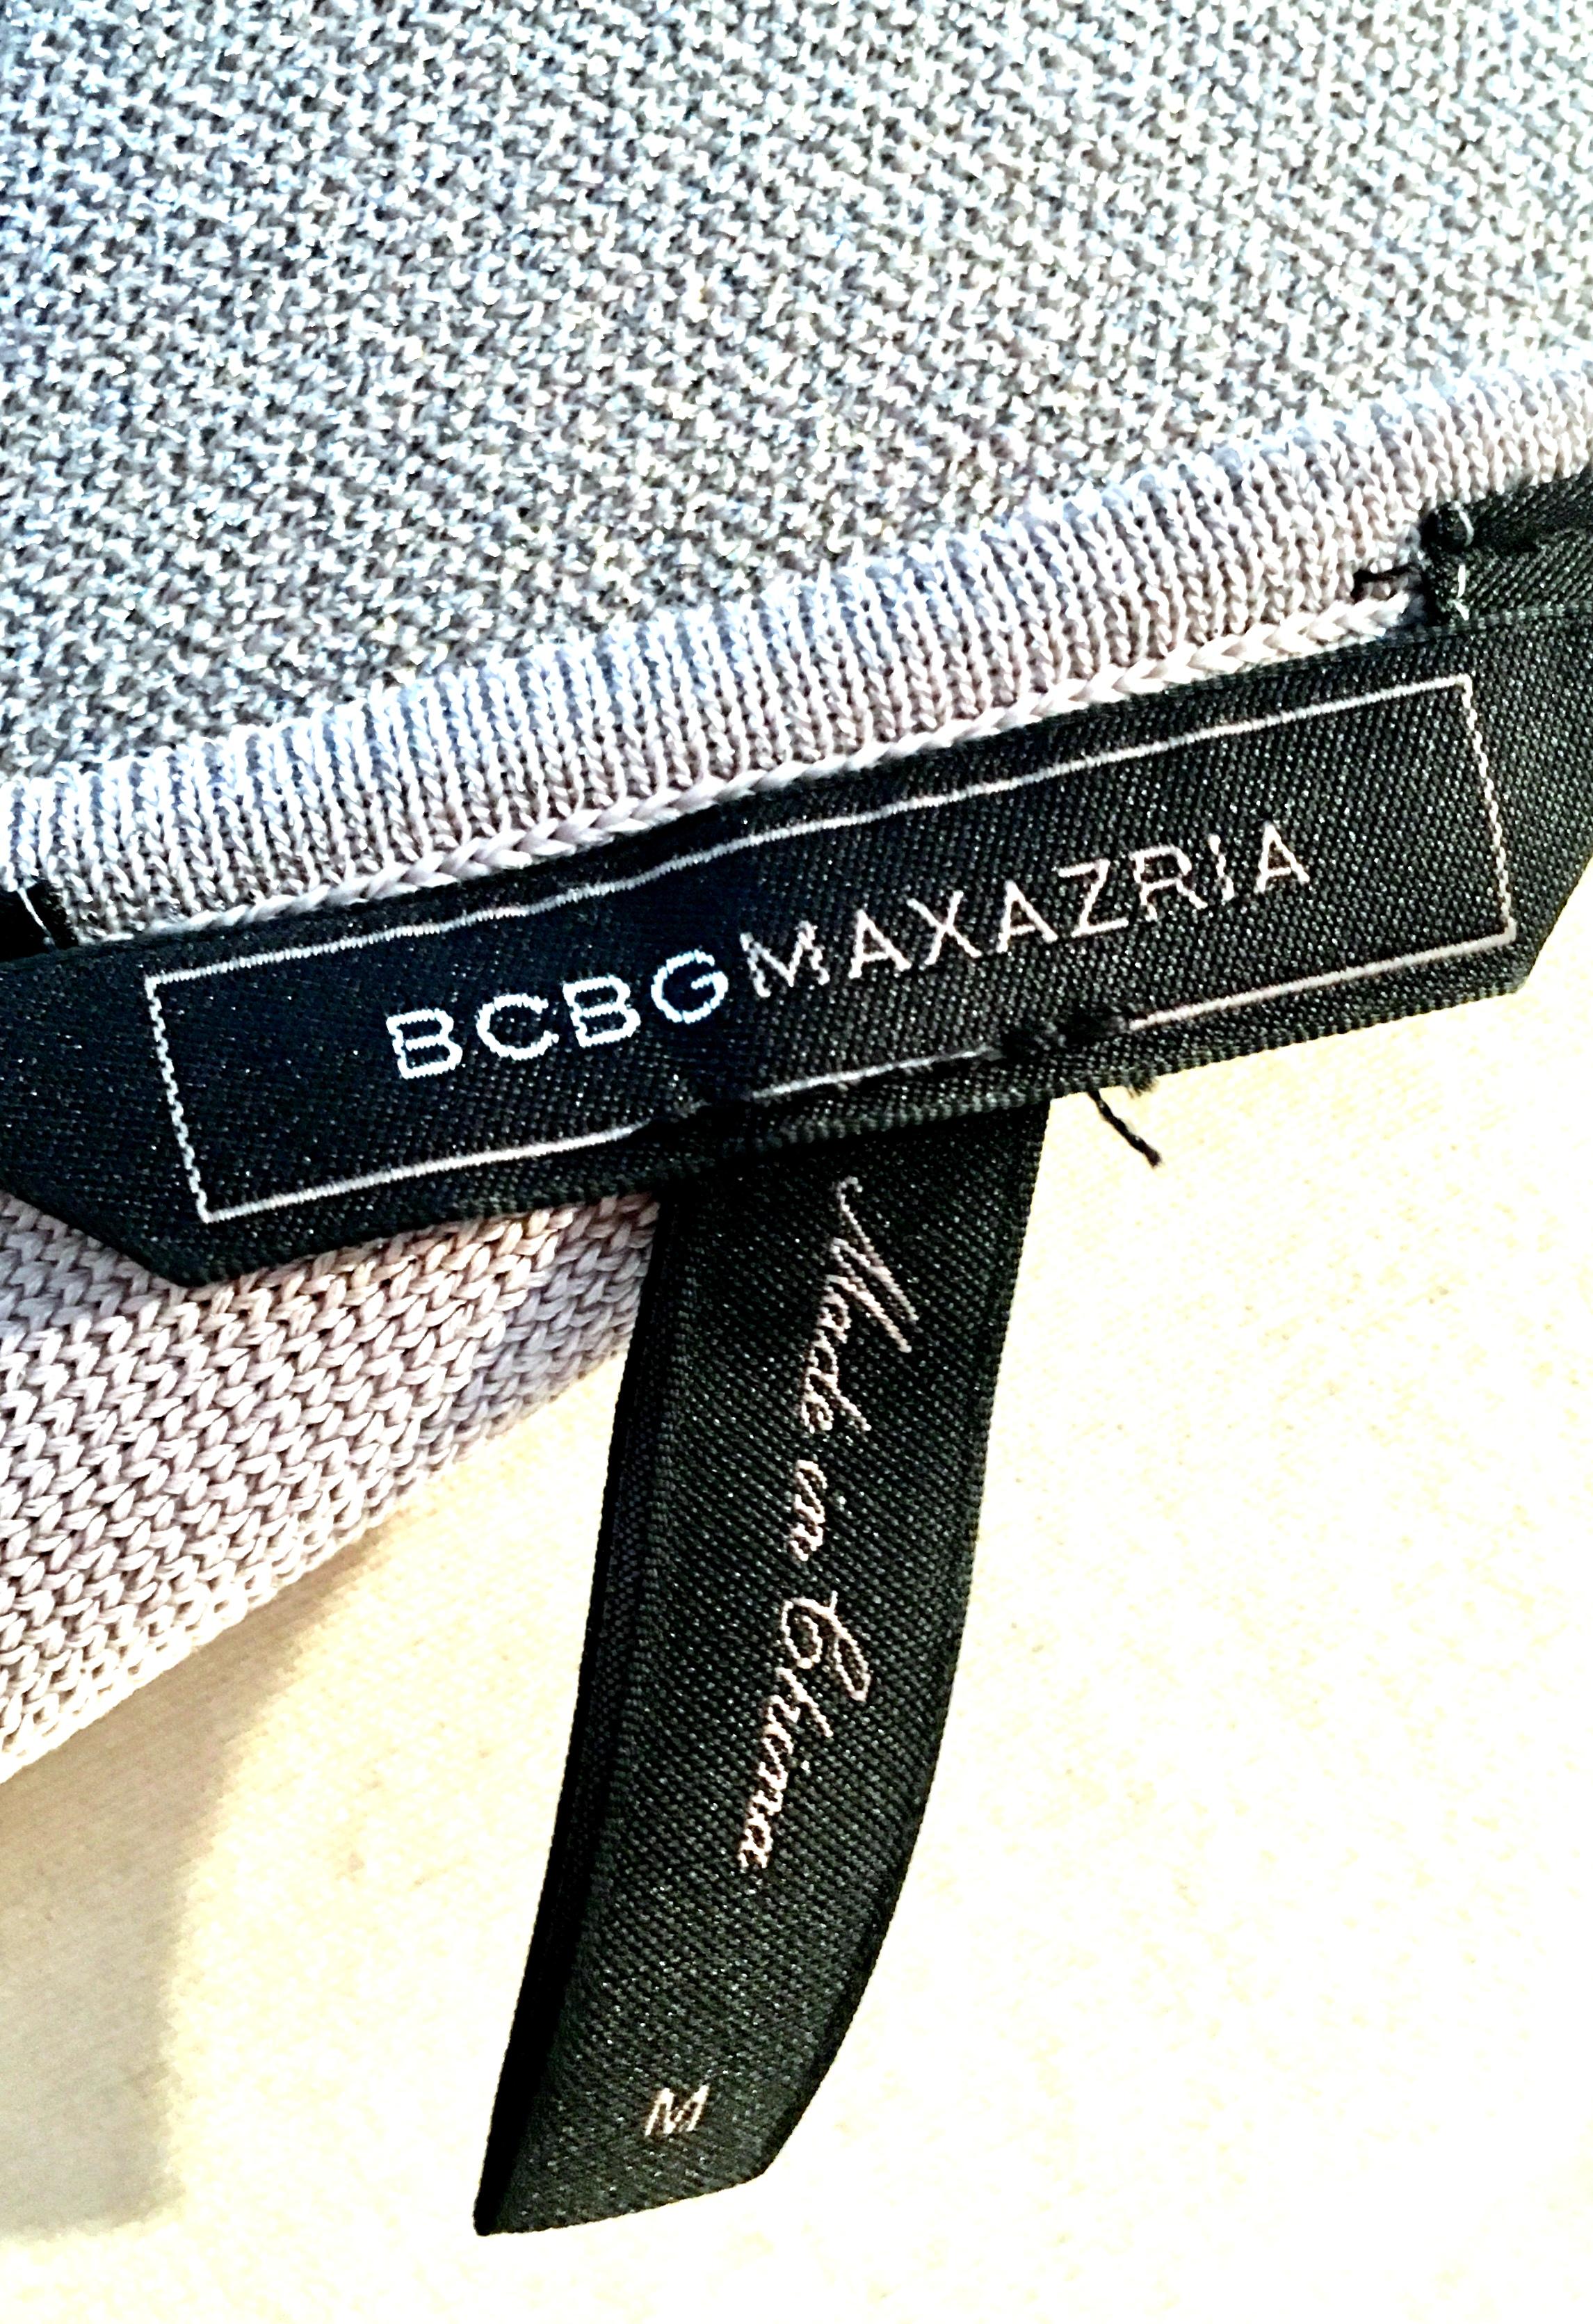 21st Century Herve Leger Style Metallic Cocktail Dress By Maxazria For BCBG  For Sale 8